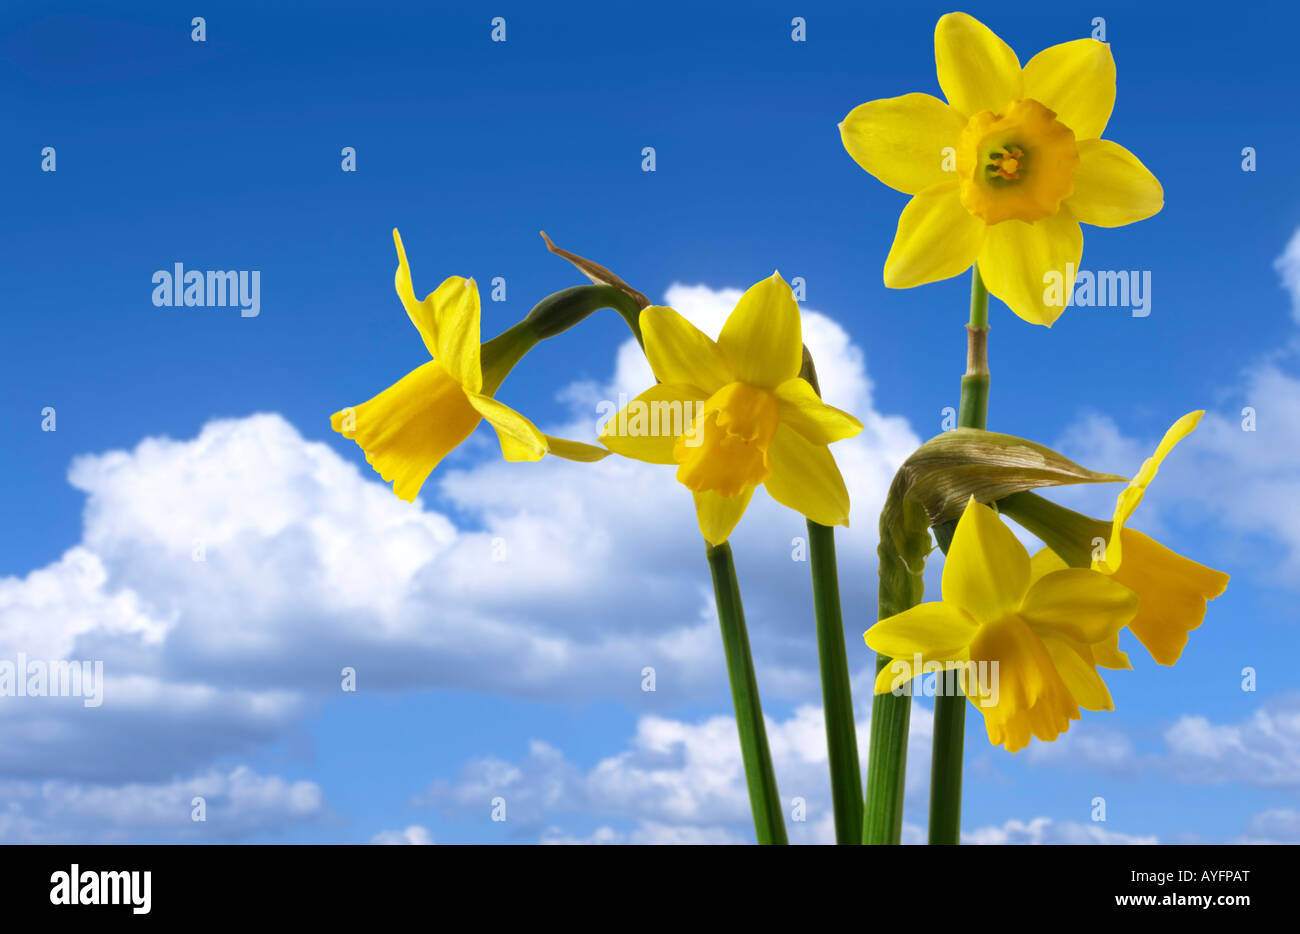 Daffodils against a blue sky with clouds. Stock Photo